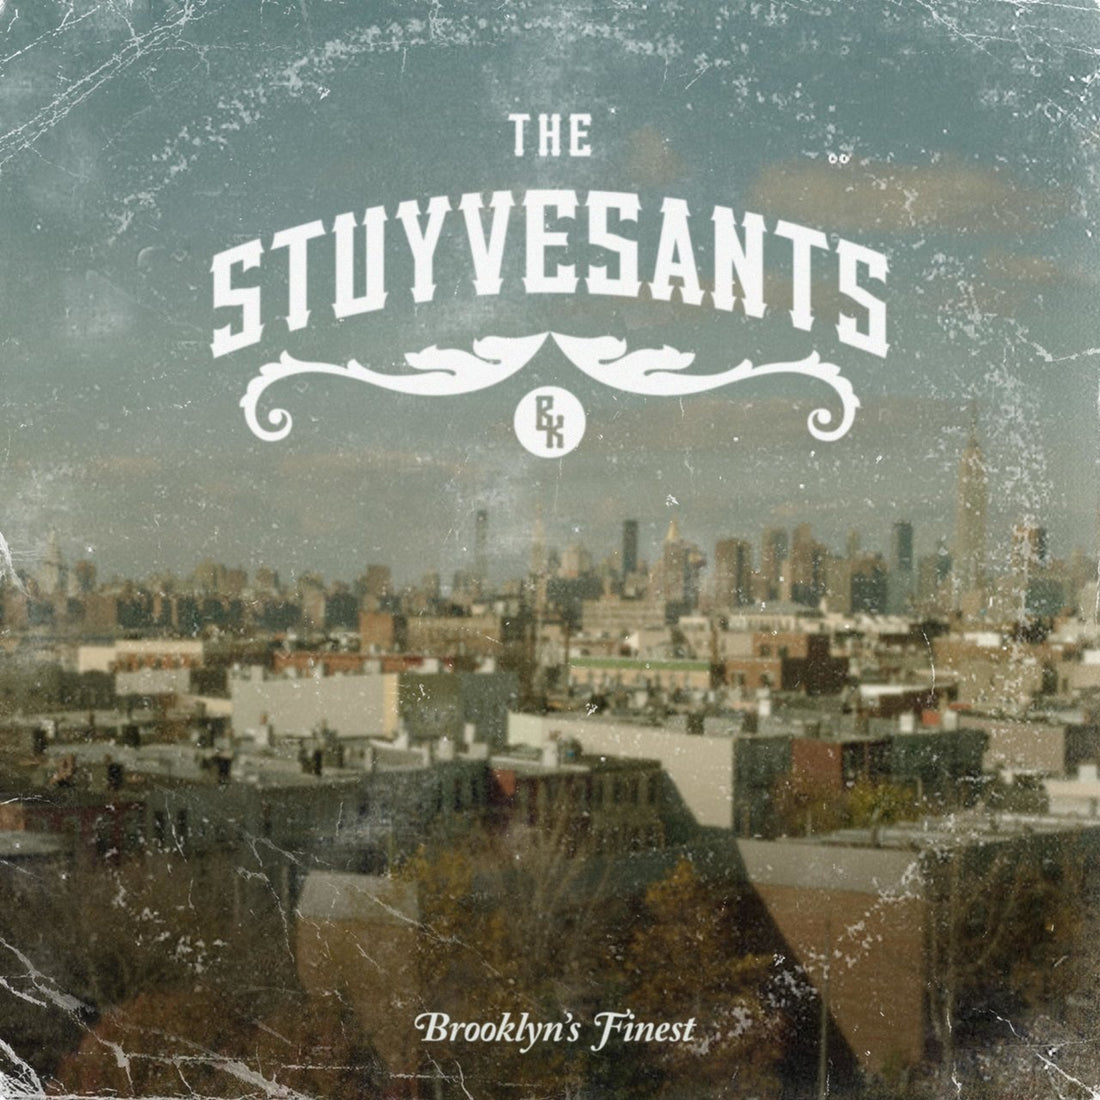 Now Playing: The Stuyvesants "Brooklyn's Finest"